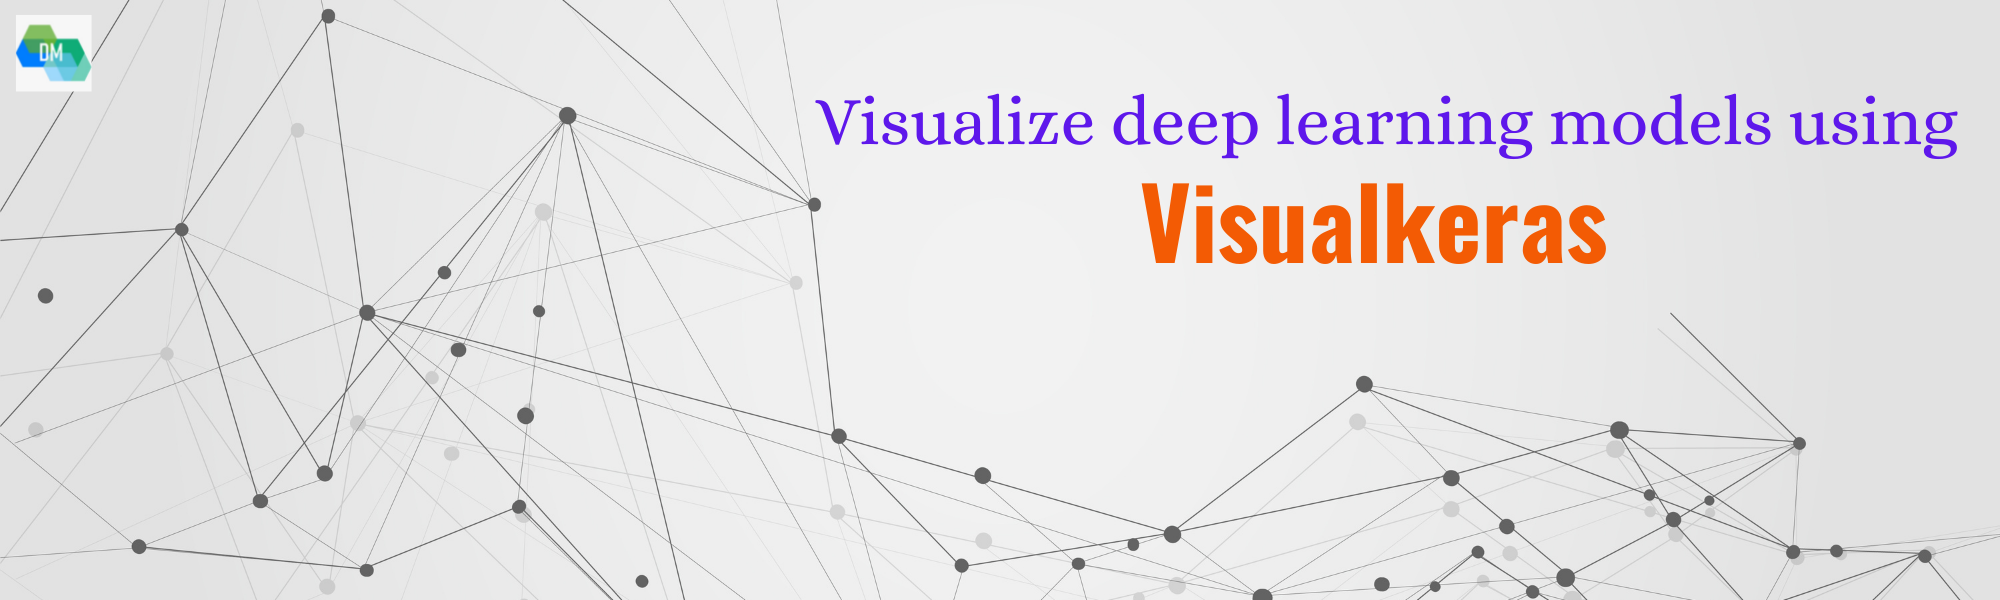 Visualize Deep Learning Models